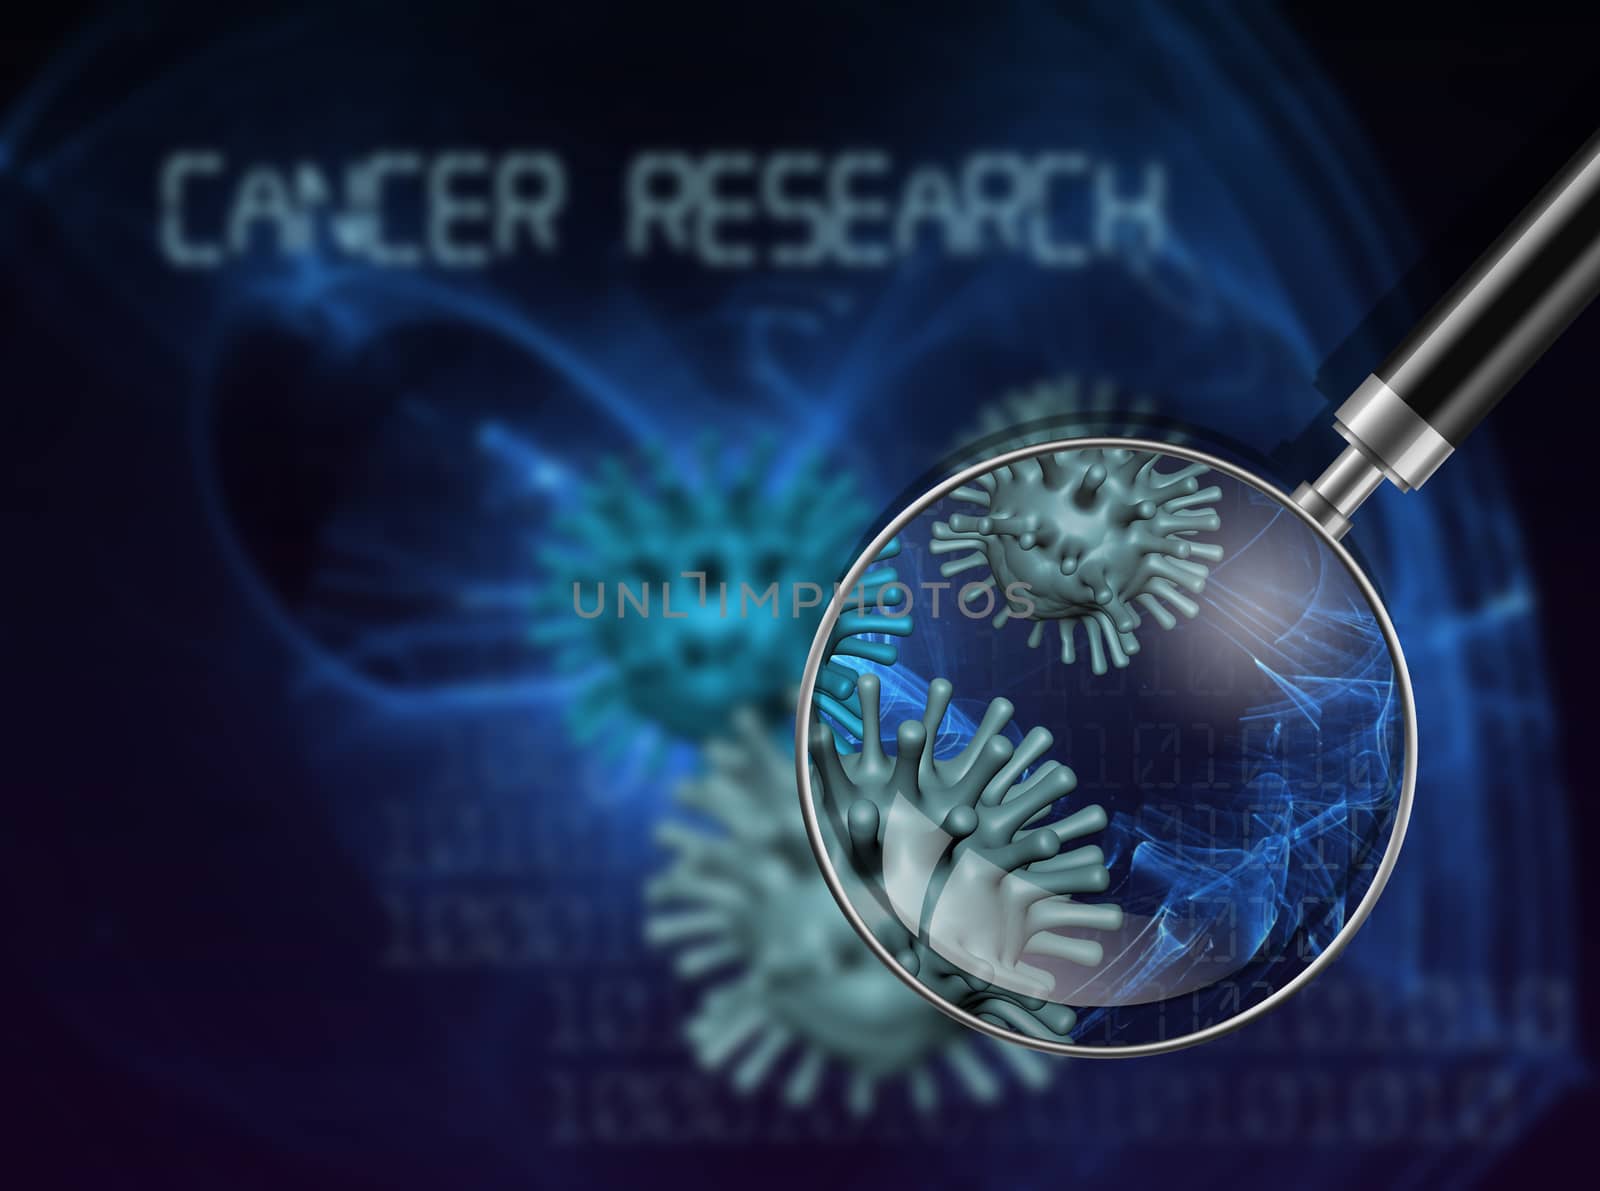 word CANCER RESEARCH  writing on  cancer image    background